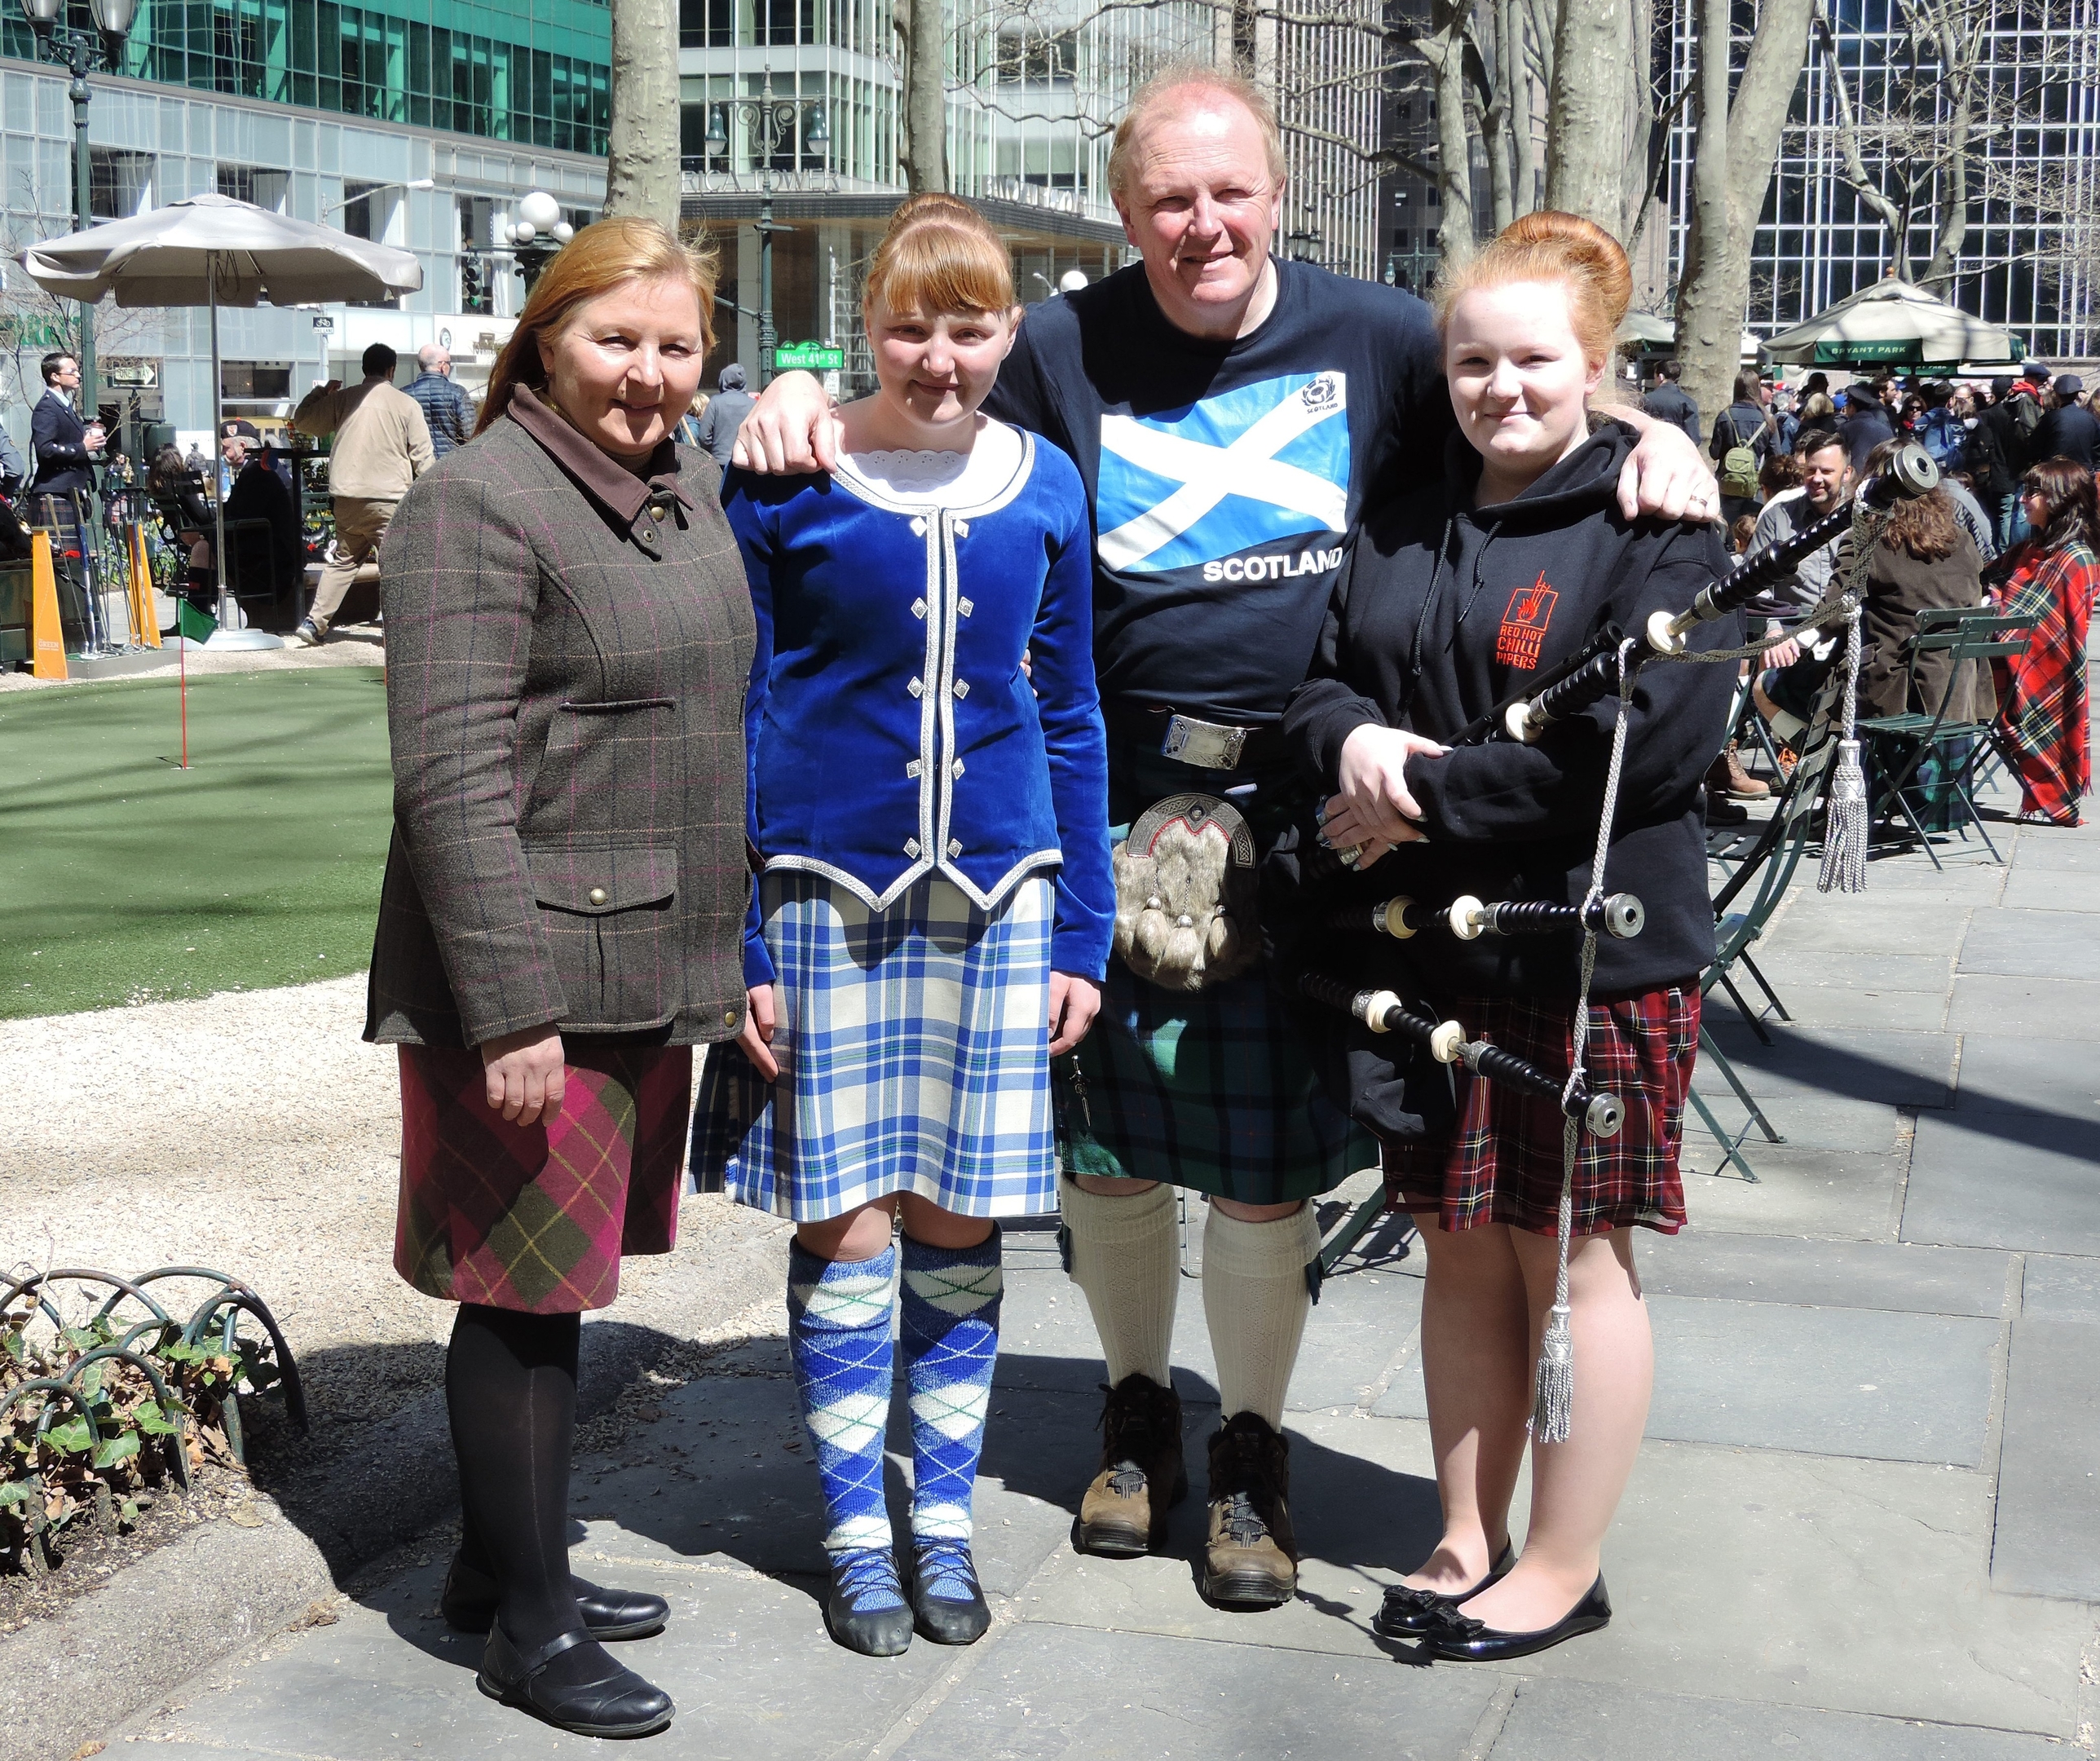 Elizabeth (right) played the bagpipes during the New York Tartan Day Parade, while her younger sister Anna performed with the New York Highland Dancers. Pictured here with their parents.